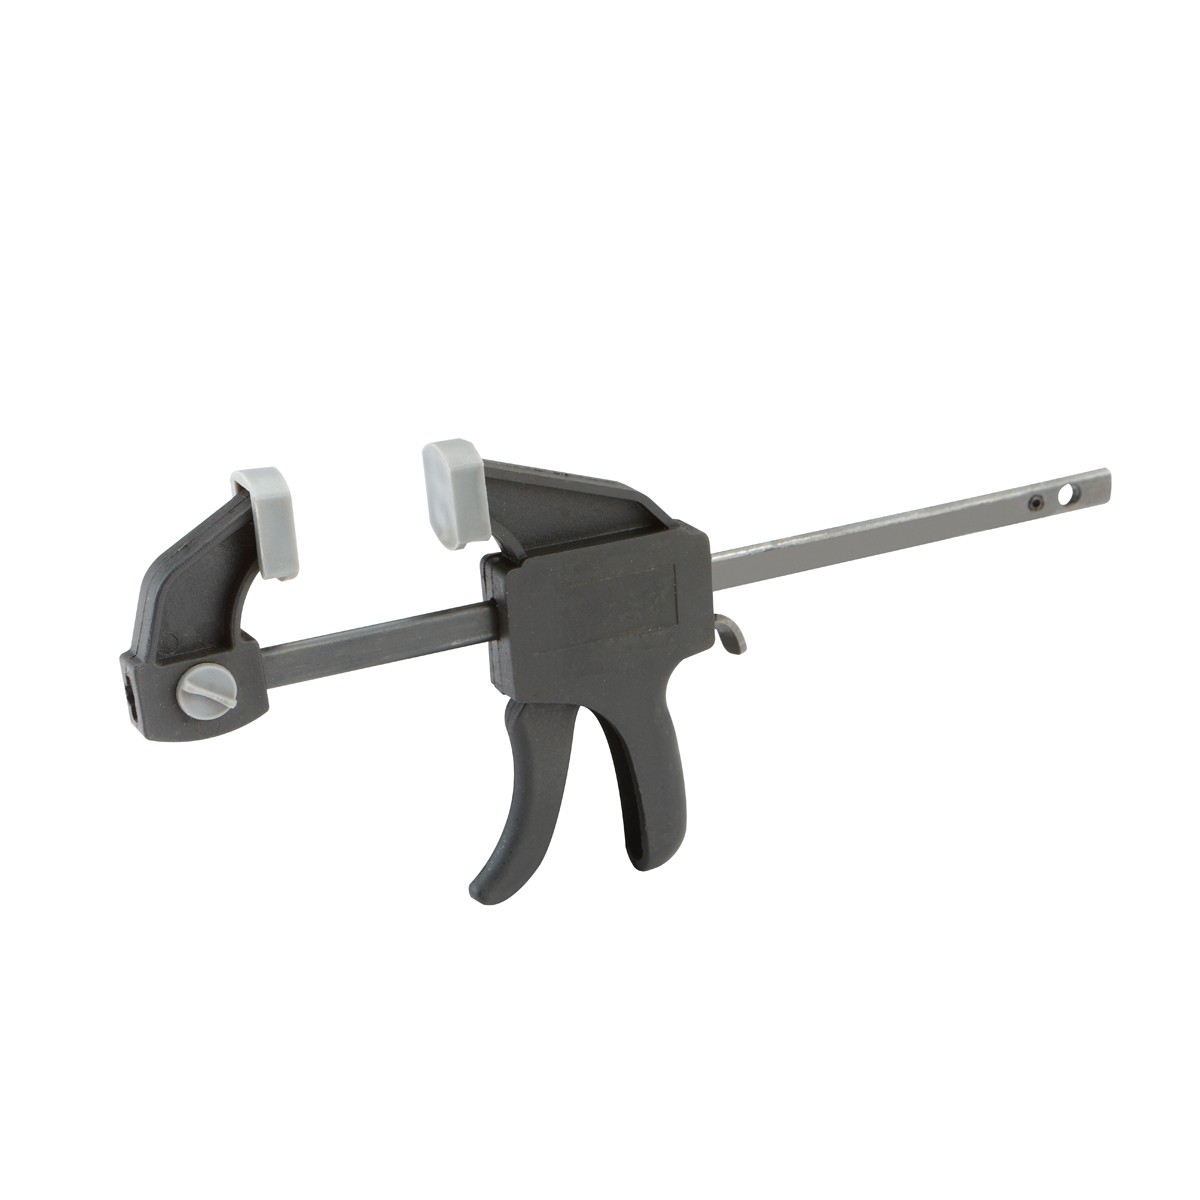 New   Pittsburgh  4 in. Ratcheting Bar Clamp / Spreader